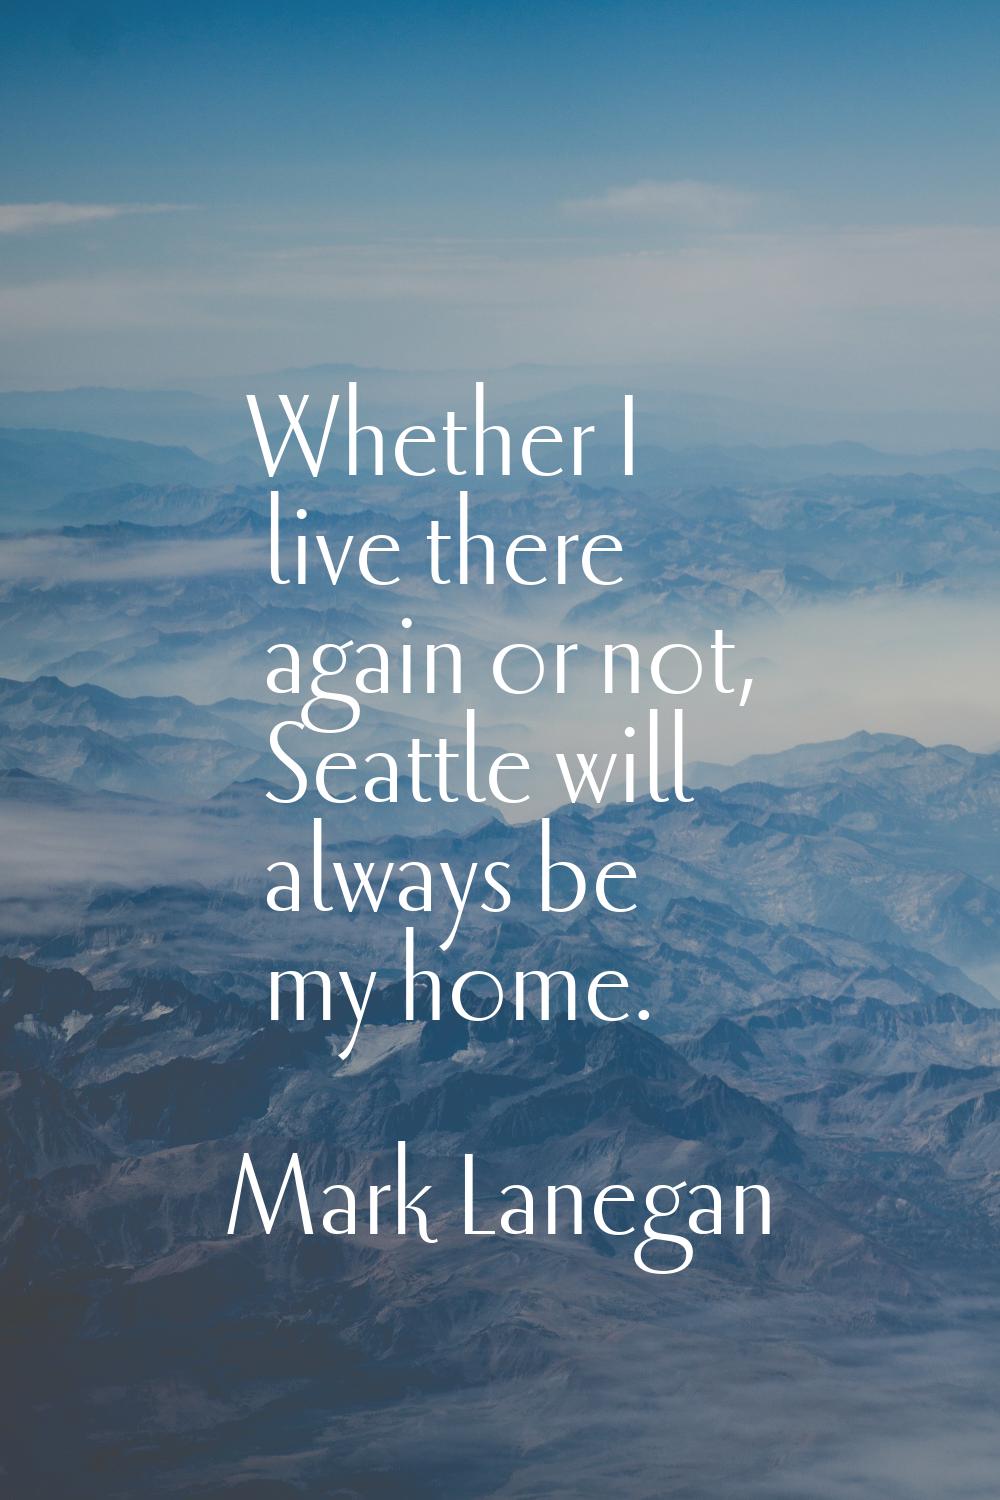 Whether I live there again or not, Seattle will always be my home.